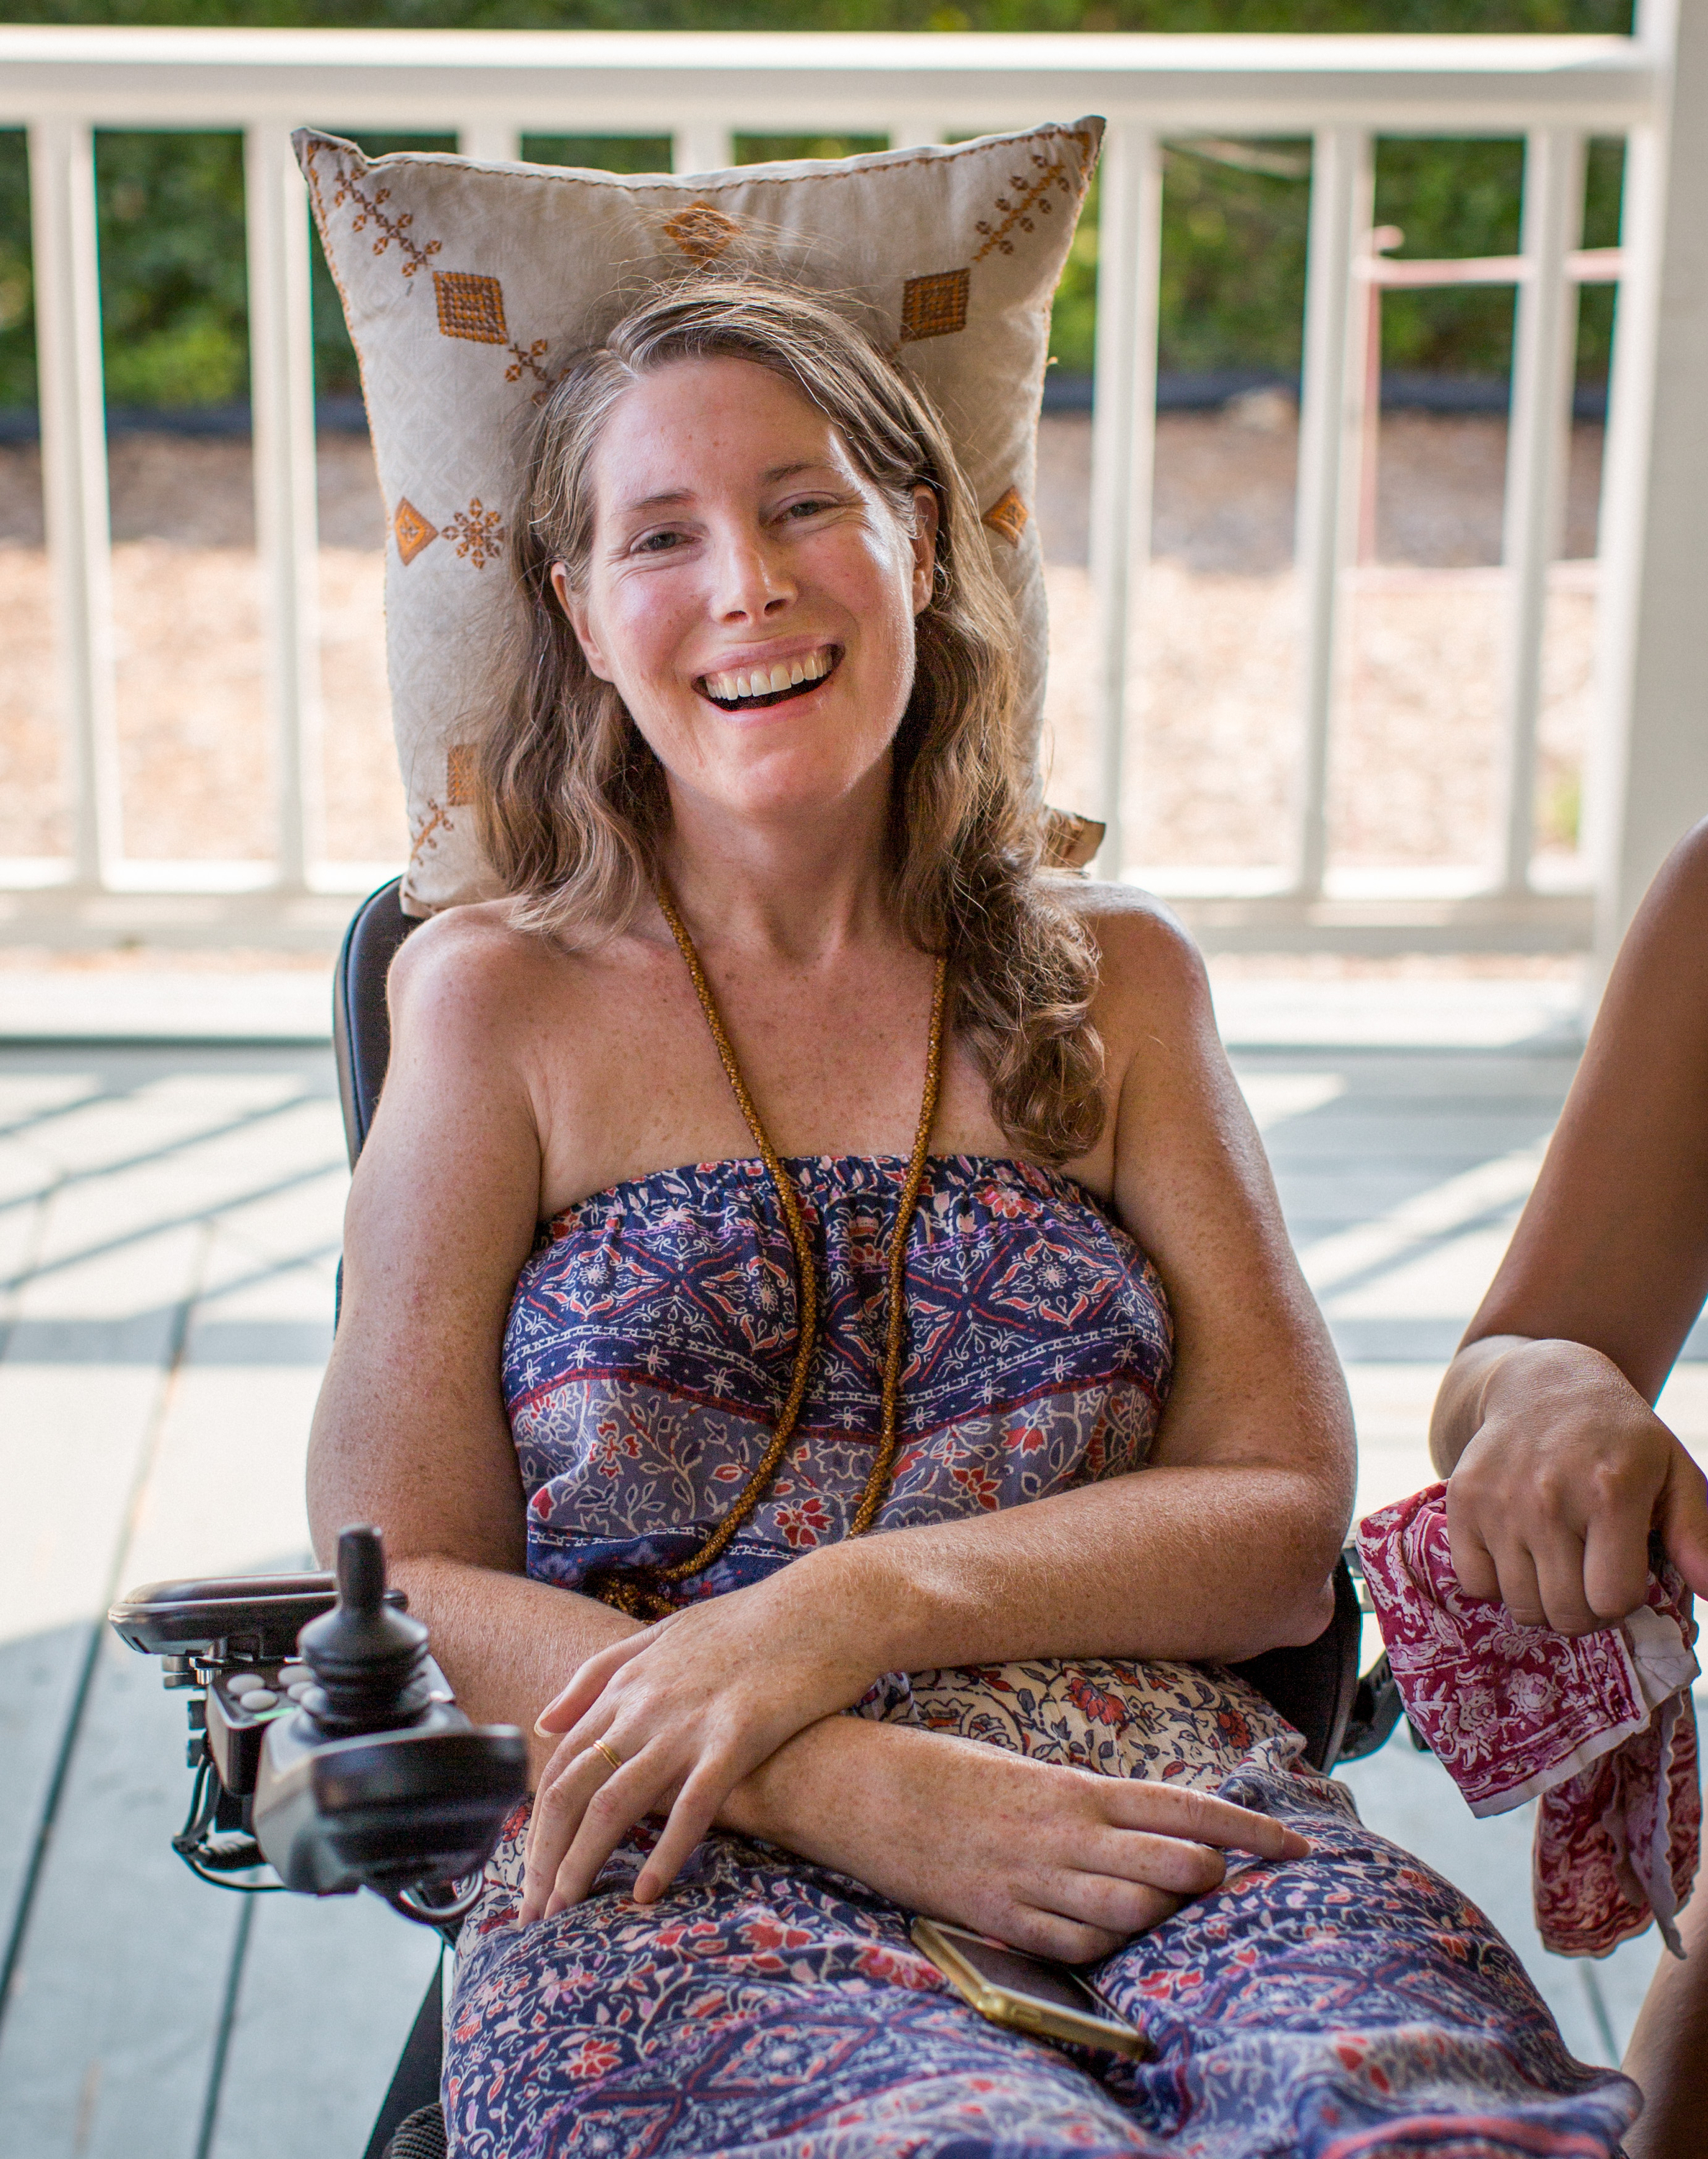 This July 24, 2016 photo provided by Niels Alpert, Betsy Davis, smiles during a going away party with her family and friends in Ojai, Calif. (Niels Alpert—AP)